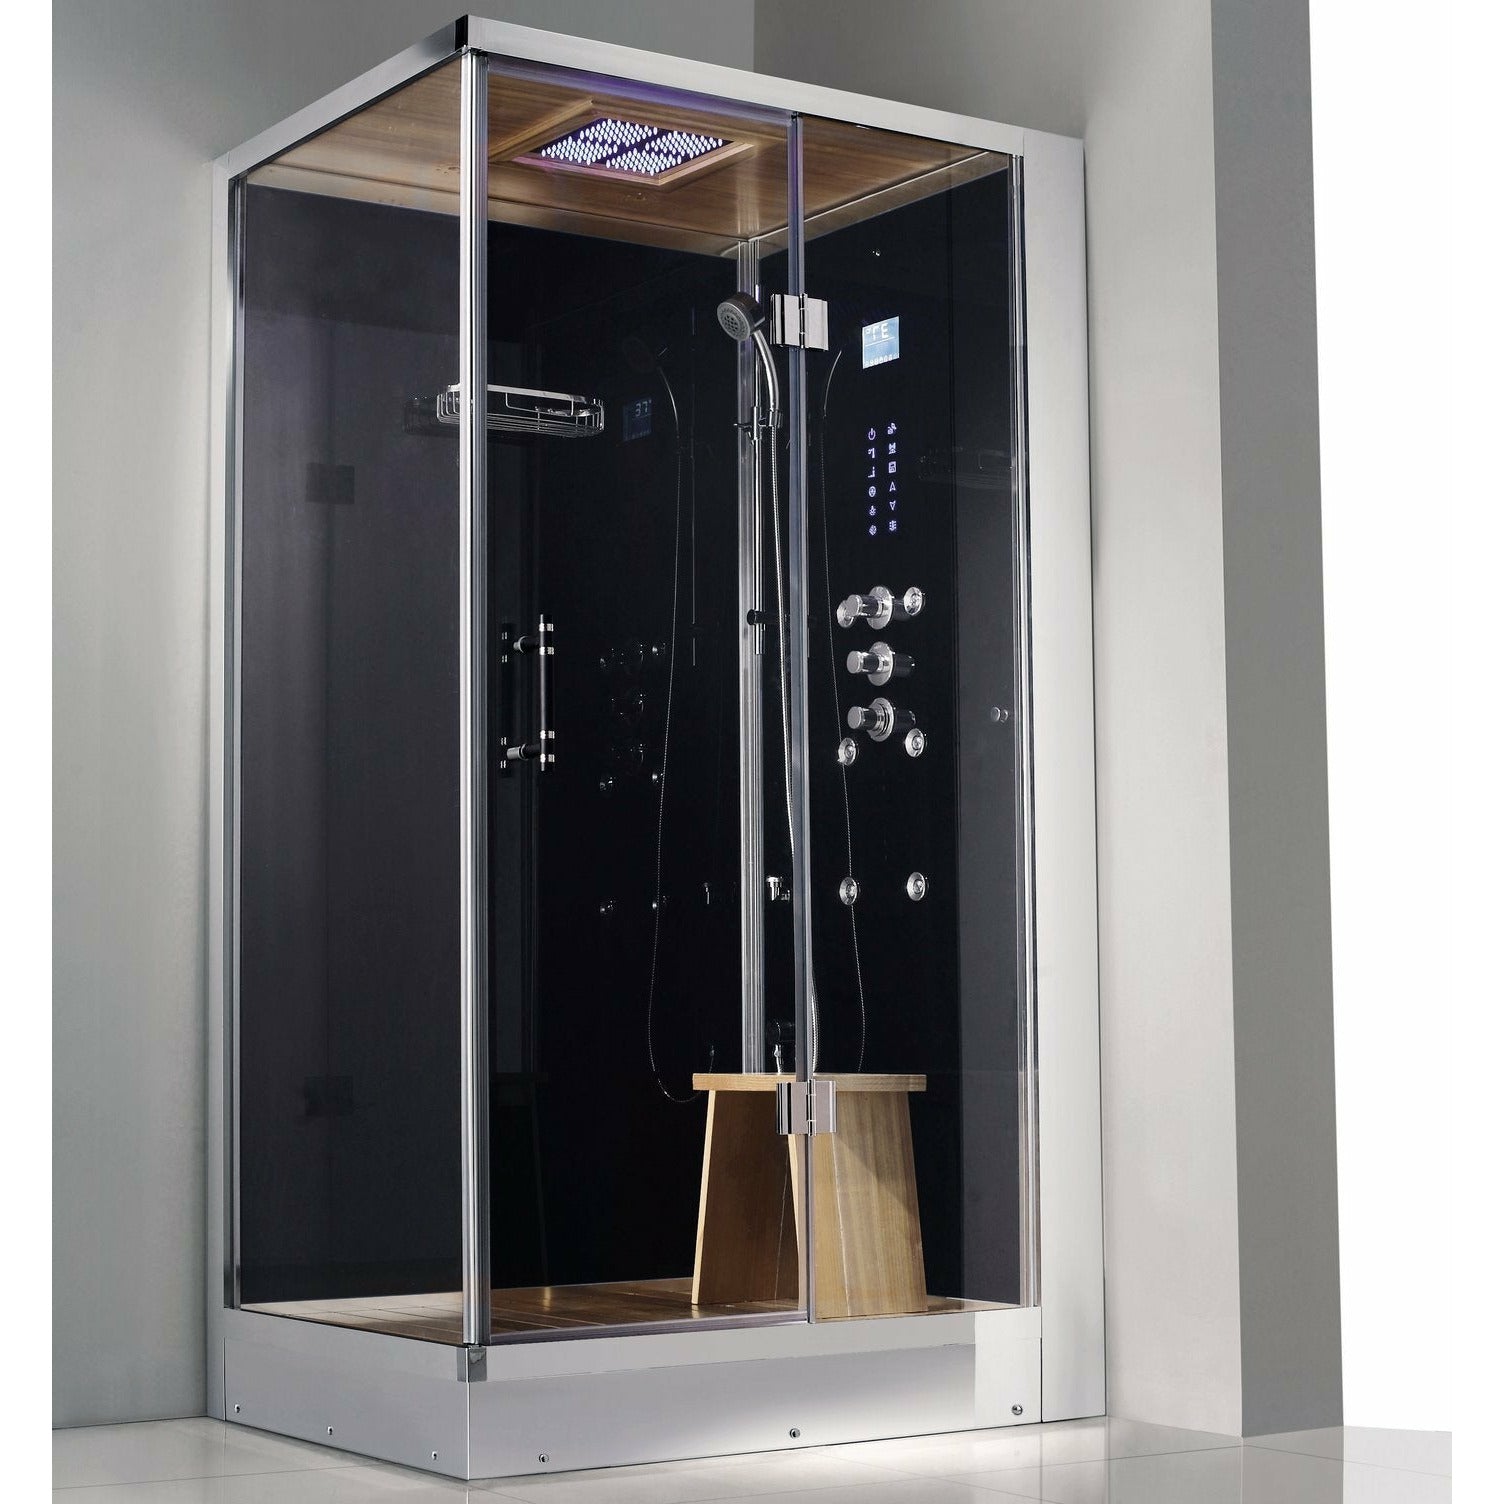 Athena Steam Shower with real oak wood ceiling and floor grids, a heavy-duty hinged glass door and a removable wooden stool left configuration